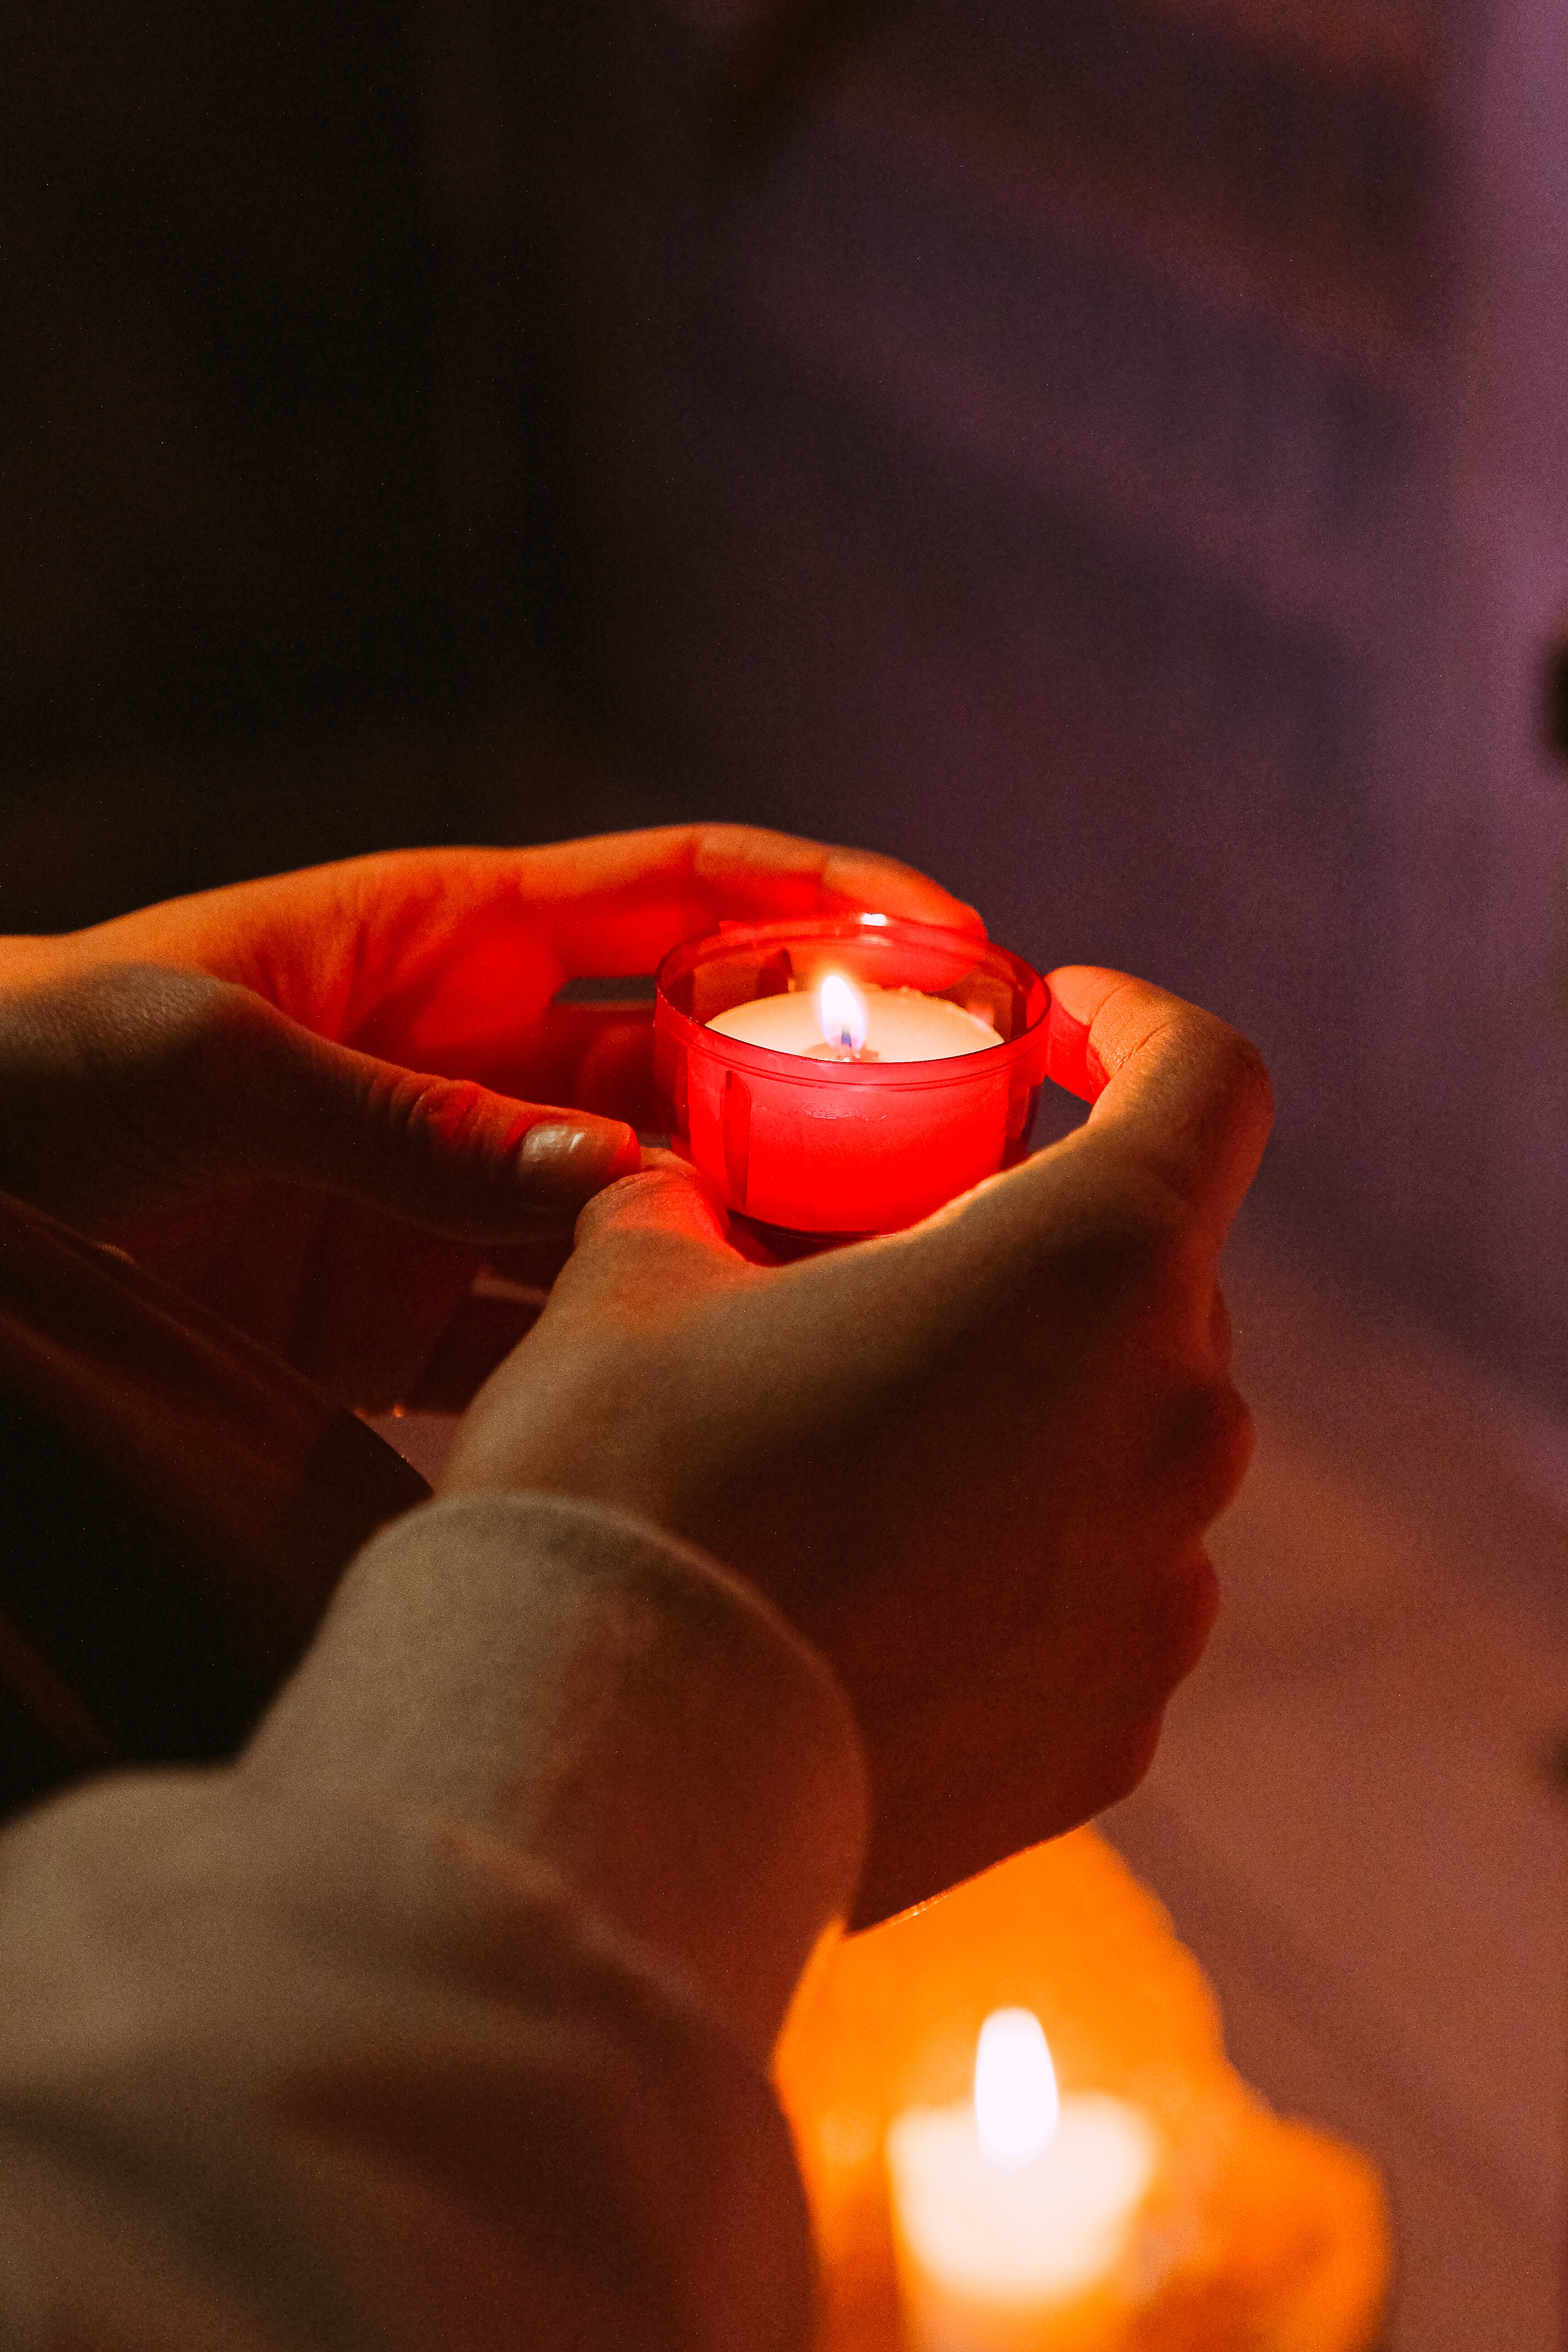 persons hands holding a red candle in a dark room